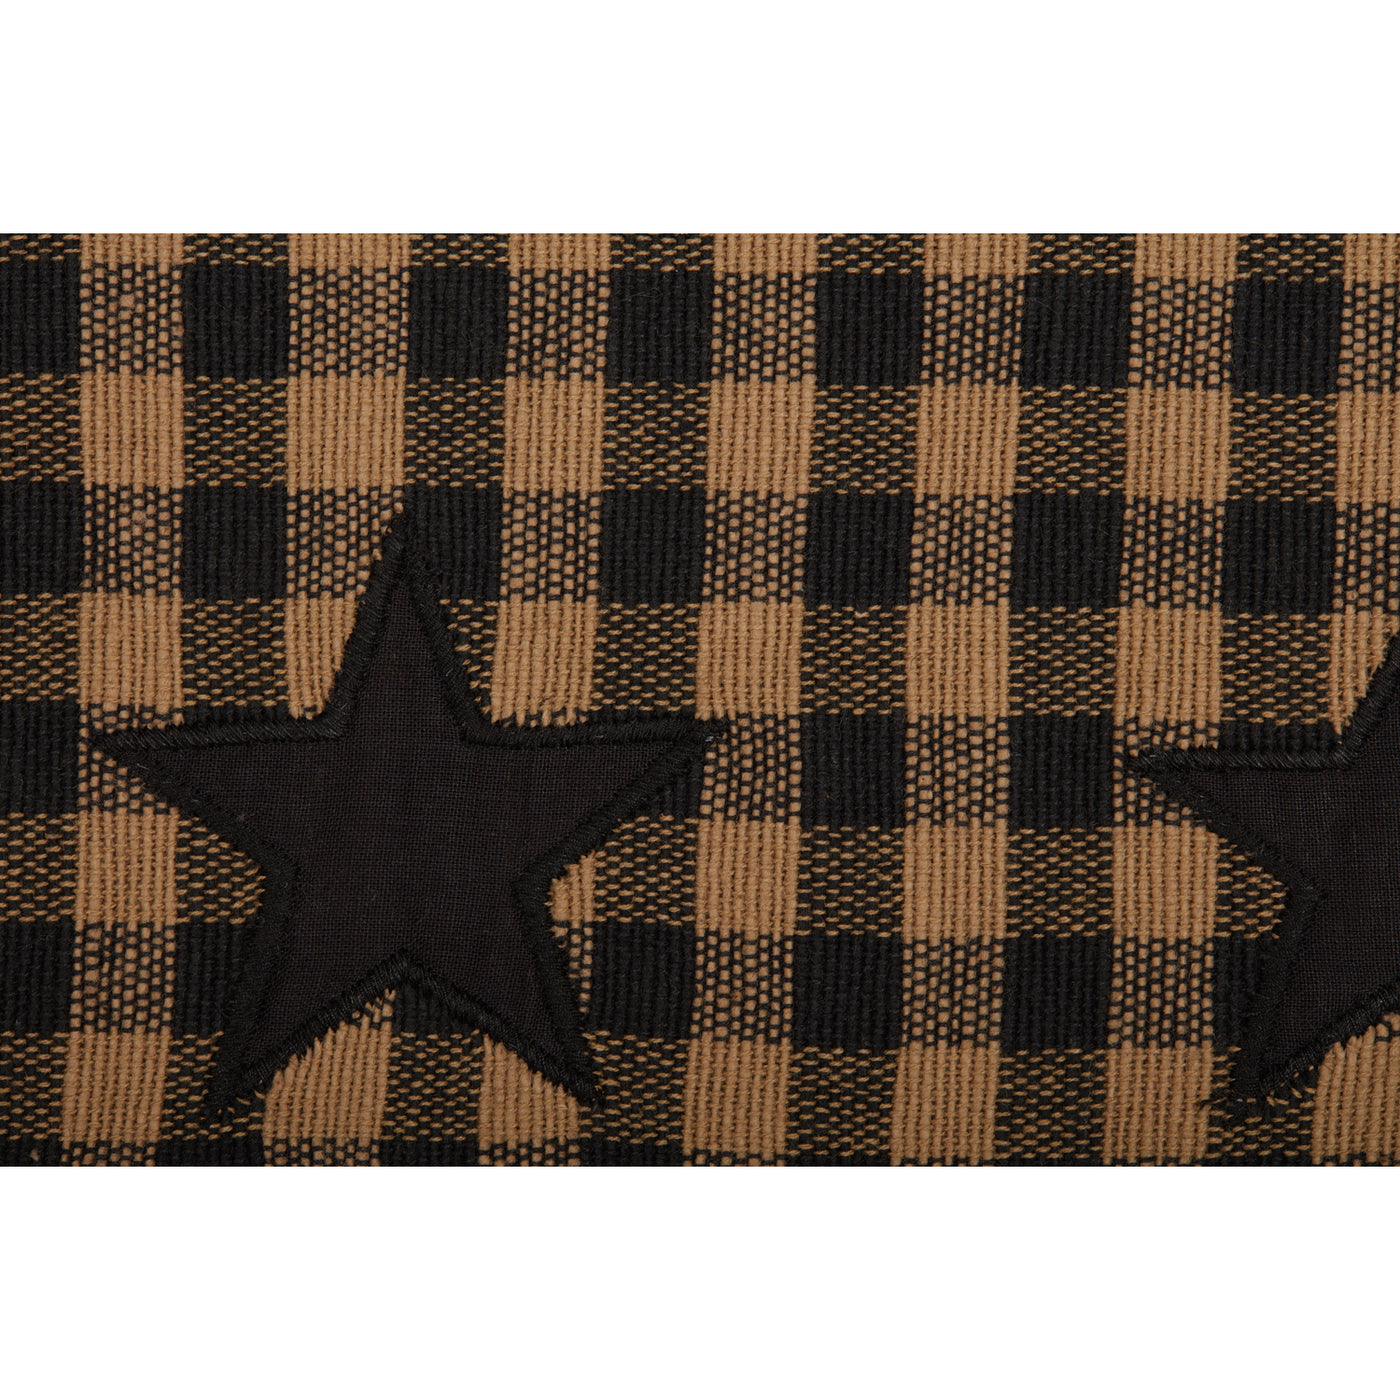 Black Star Black And Tan Woven Table Runner 13" x 36"